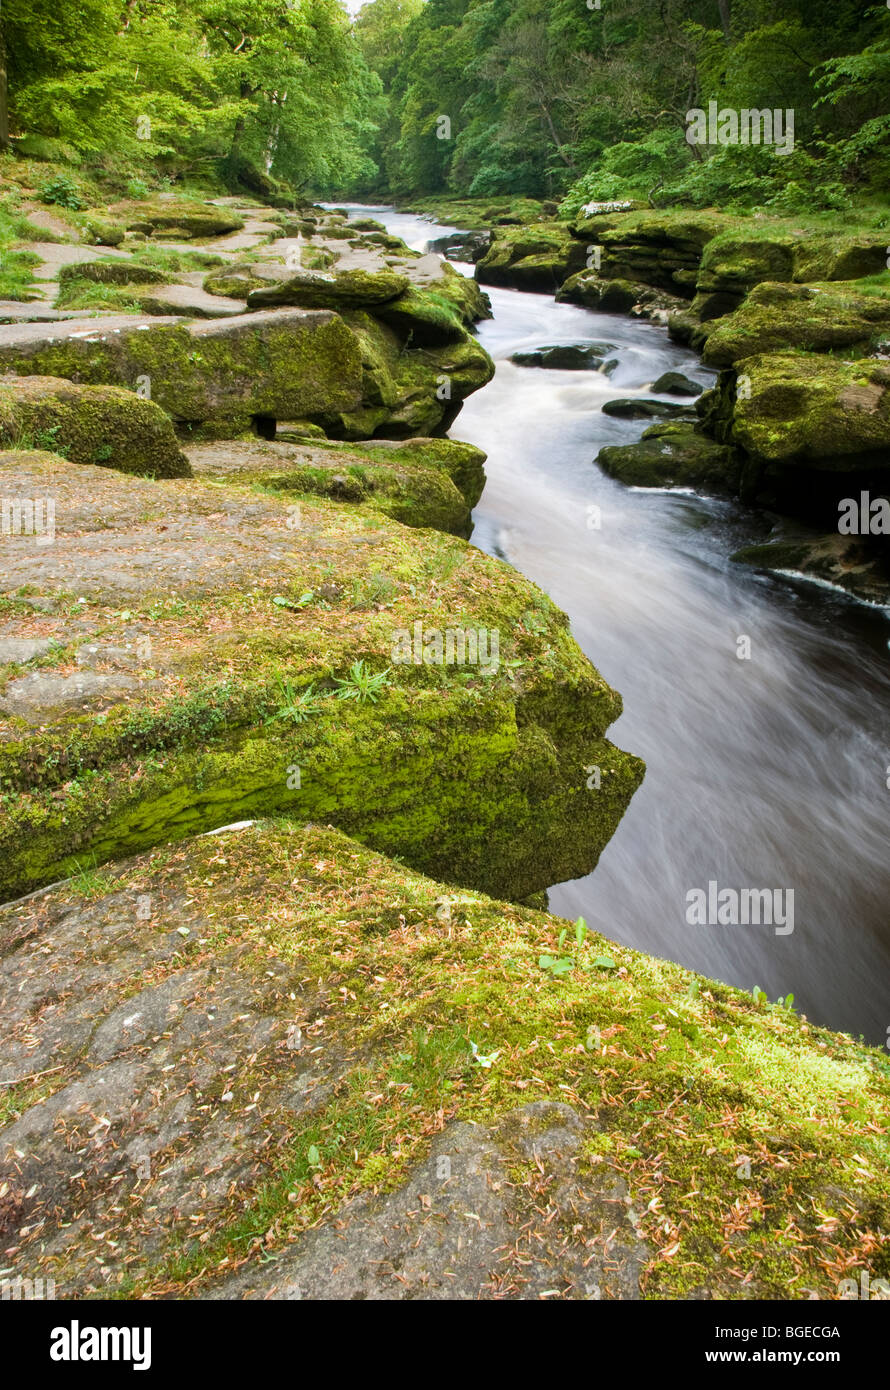 Rocks at The Strid on the River Wharfe along the Dales Way Long Distance Path Stock Photo